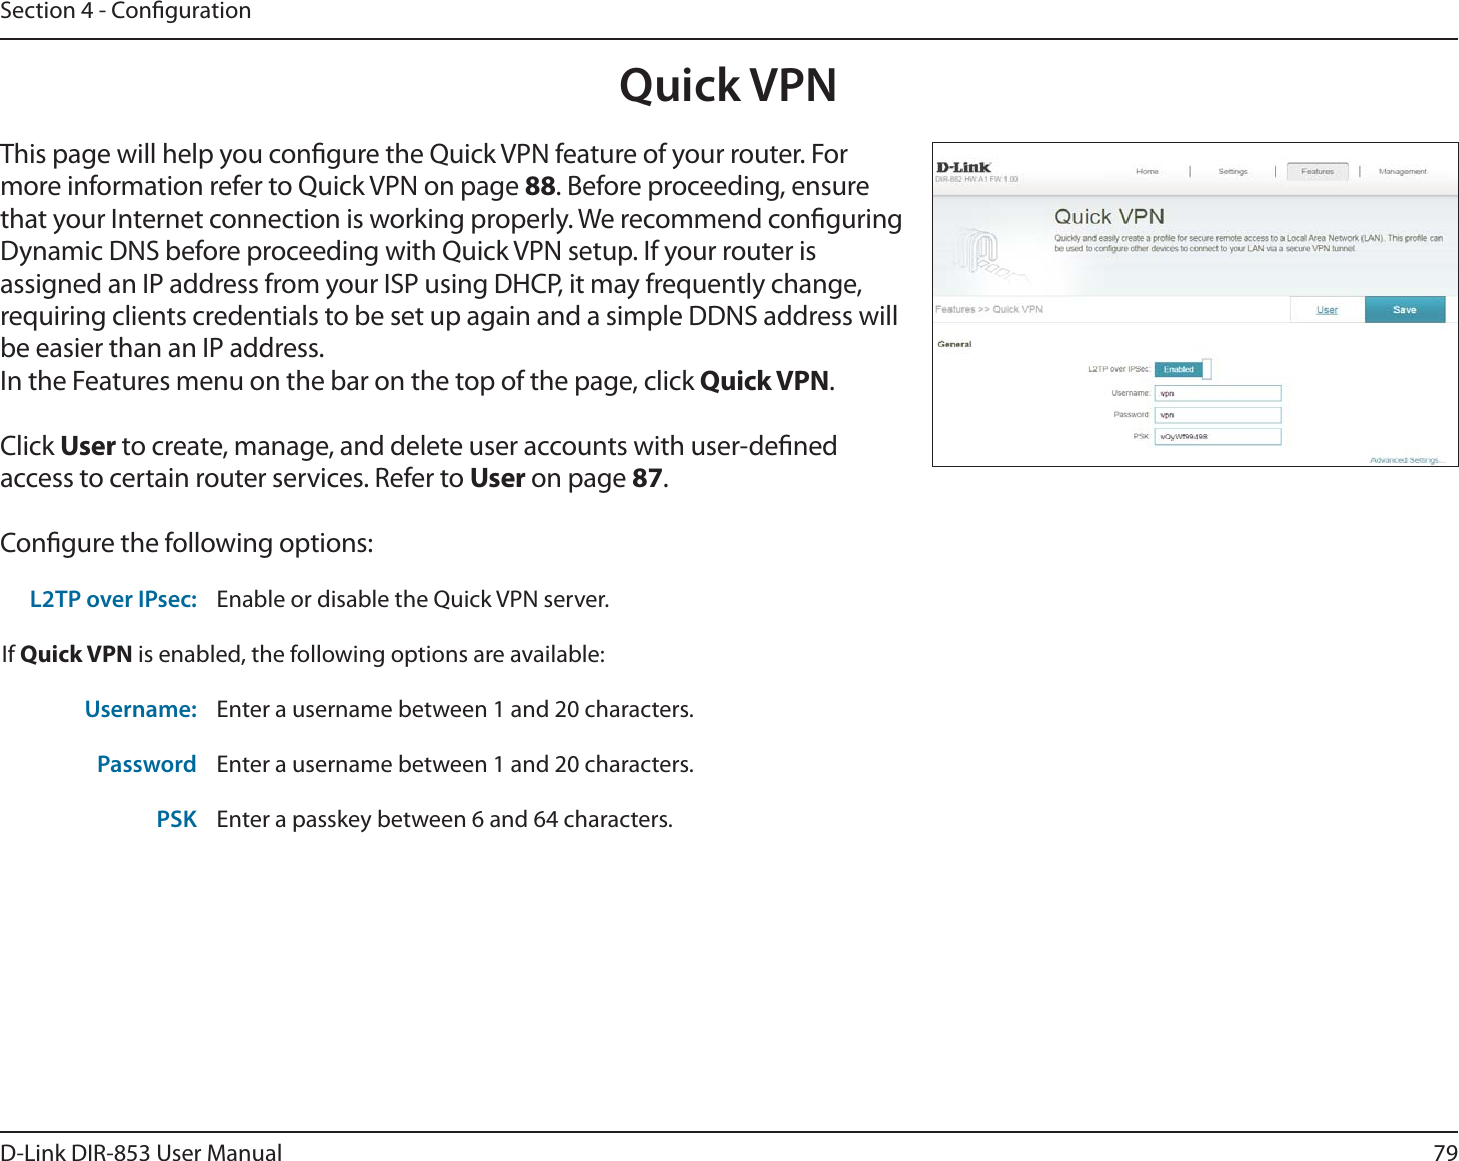 79D-Link DIR-853 User ManualSection 4 - CongurationQuick VPNThis page will help you congure the Quick VPN feature of your router. For more information refer to Quick VPN on page 88. Before proceeding, ensure that your Internet connection is working properly. We recommend conguring Dynamic DNS before proceeding with Quick VPN setup. If your router is assigned an IP address from your ISP using DHCP, it may frequently change, requiring clients credentials to be set up again and a simple DDNS address will be easier than an IP address.In the Features menu on the bar on the top of the page, click Quick VPN.Click User to create, manage, and delete user accounts with user-dened access to certain router services. Refer to User on page 87.Congure the following options:L2TP over IPsec: Enable or disable the Quick VPN server.If Quick VPN is enabled, the following options are available:Username: Enter a username between 1 and 20 characters.Password Enter a username between 1 and 20 characters.PSK Enter a passkey between 6 and 64 characters.